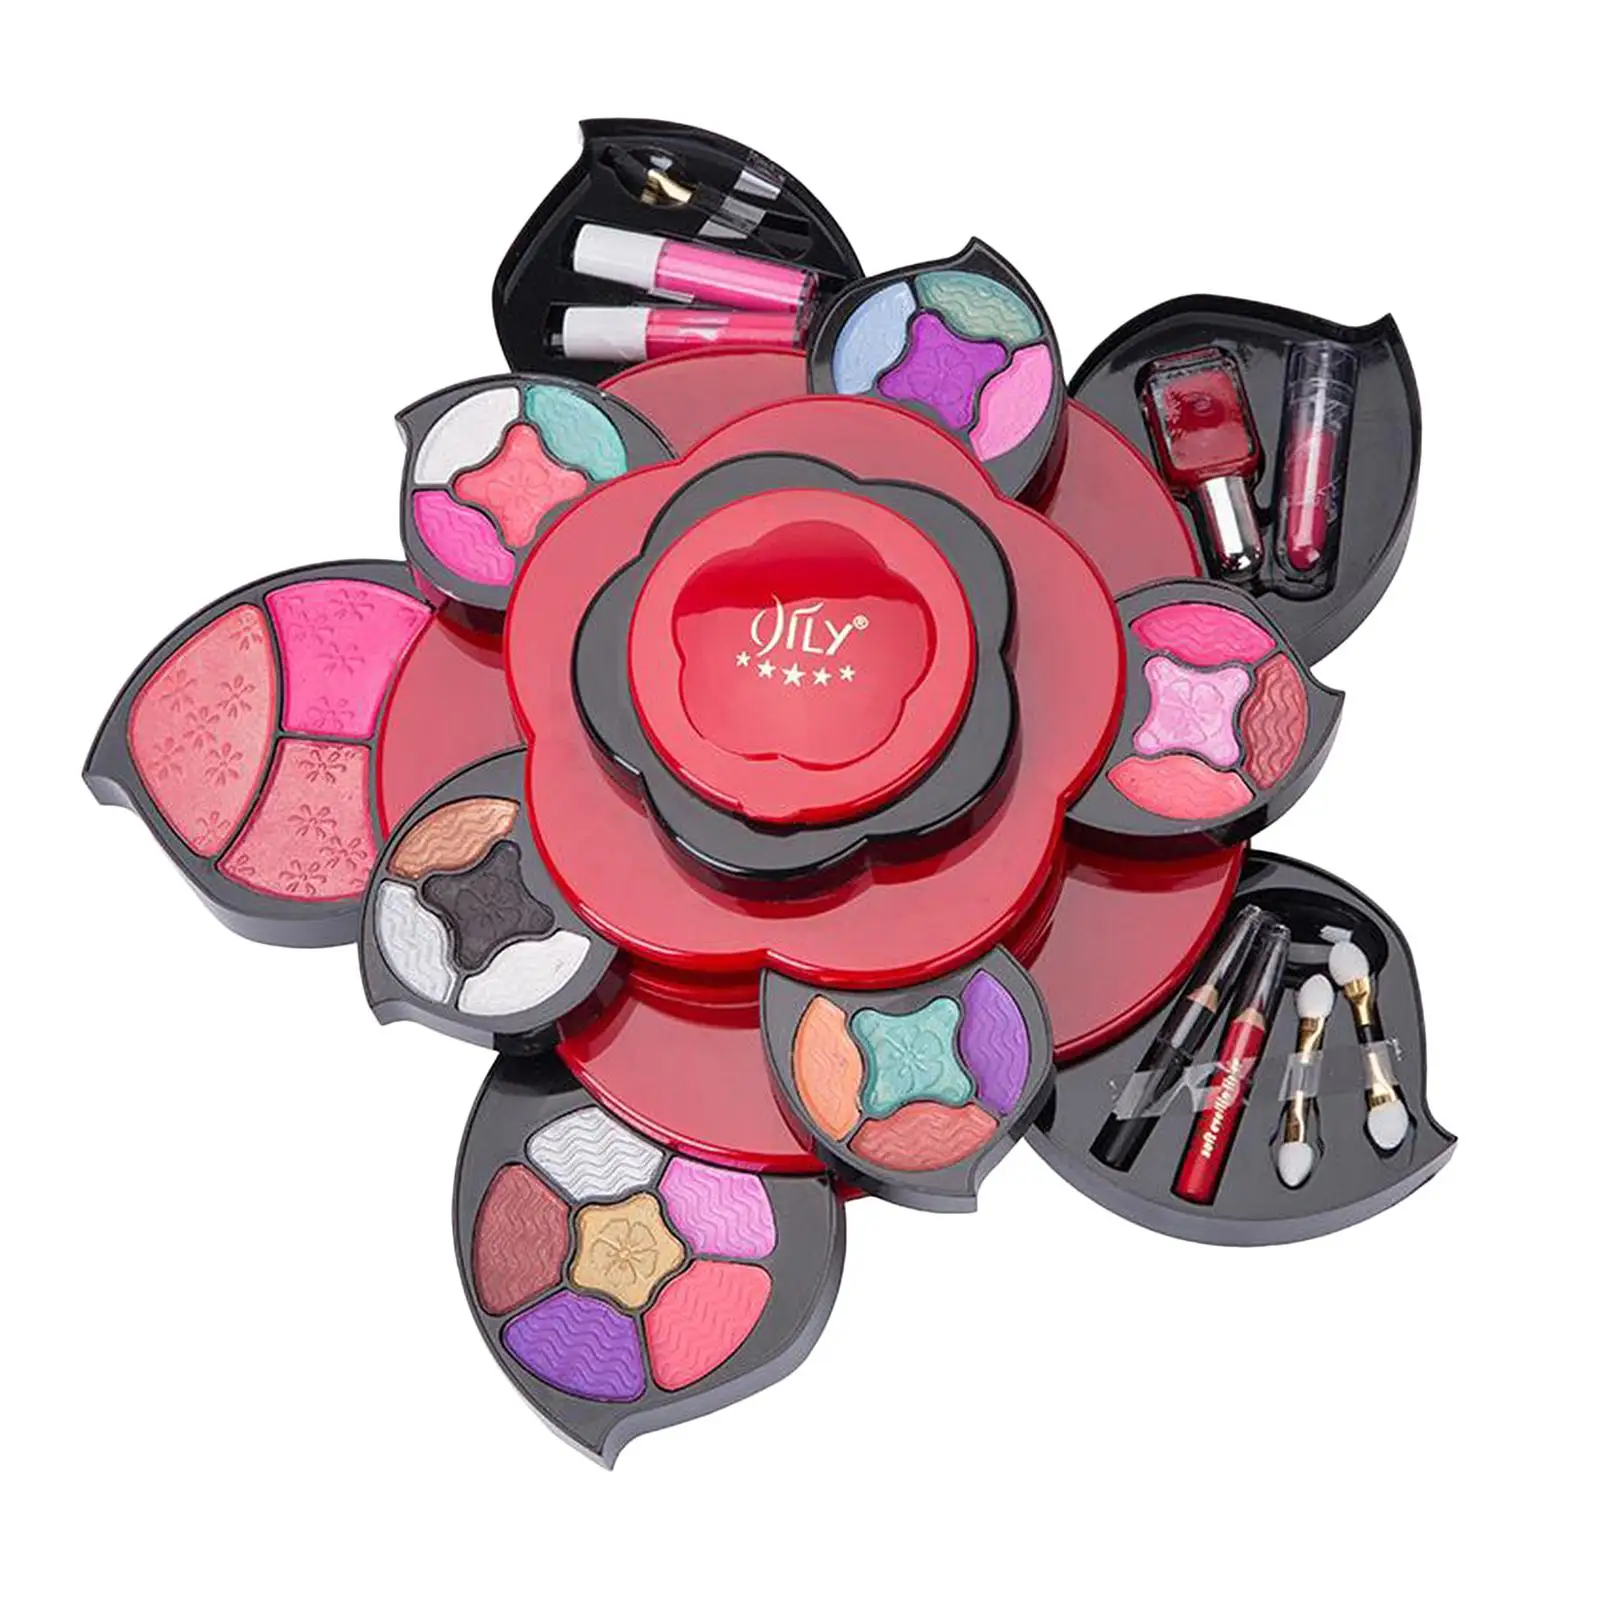 Makeup Kits for Teens Flower Pallete Gift Set for Girls Variety Shade Array